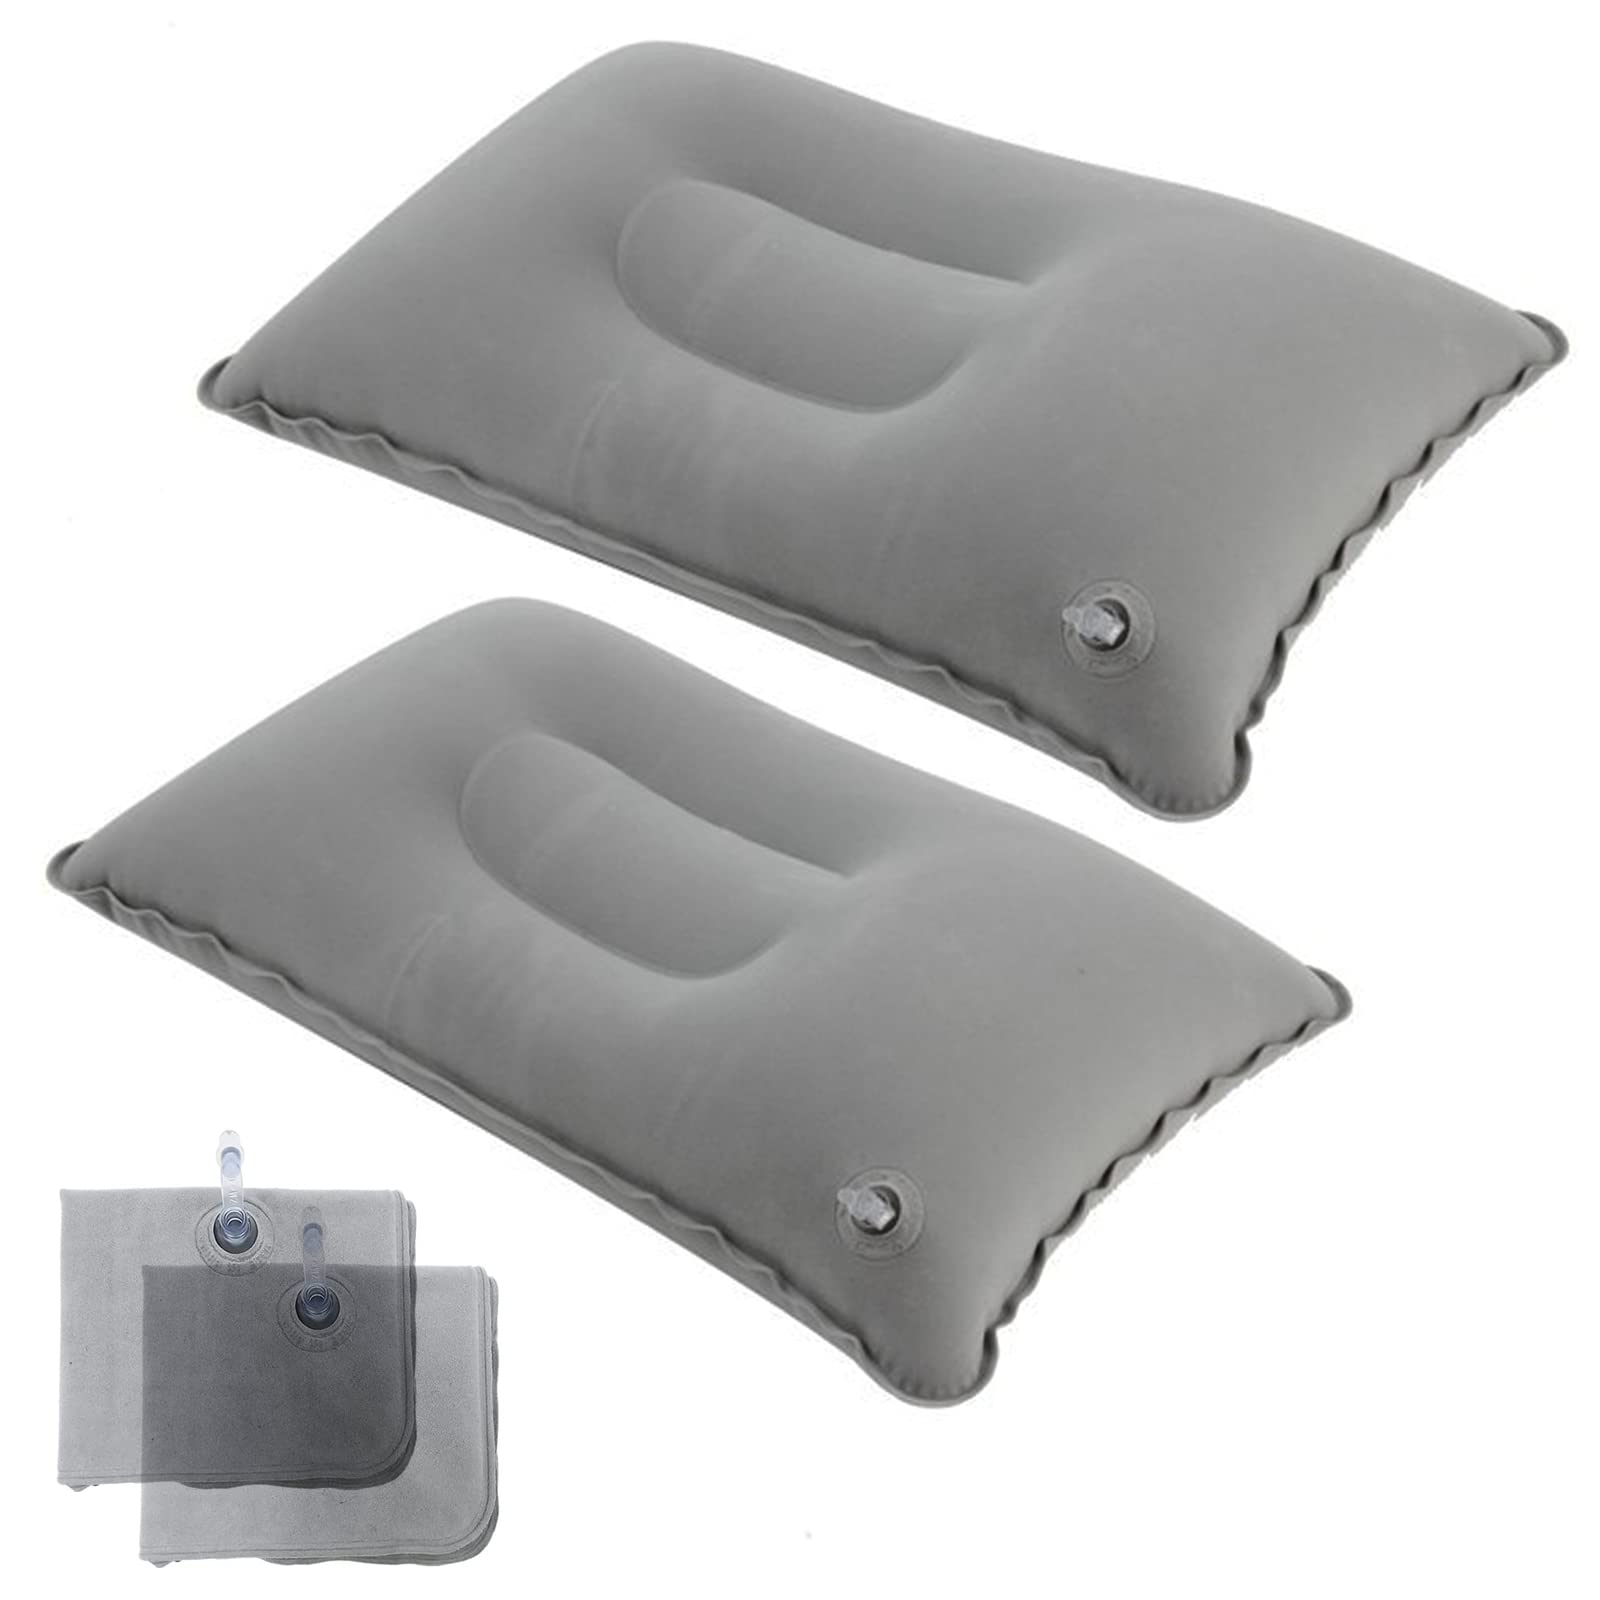 Dogxiong 2 Pack Ultralight Inflatable Pillow Small Squared Flocked